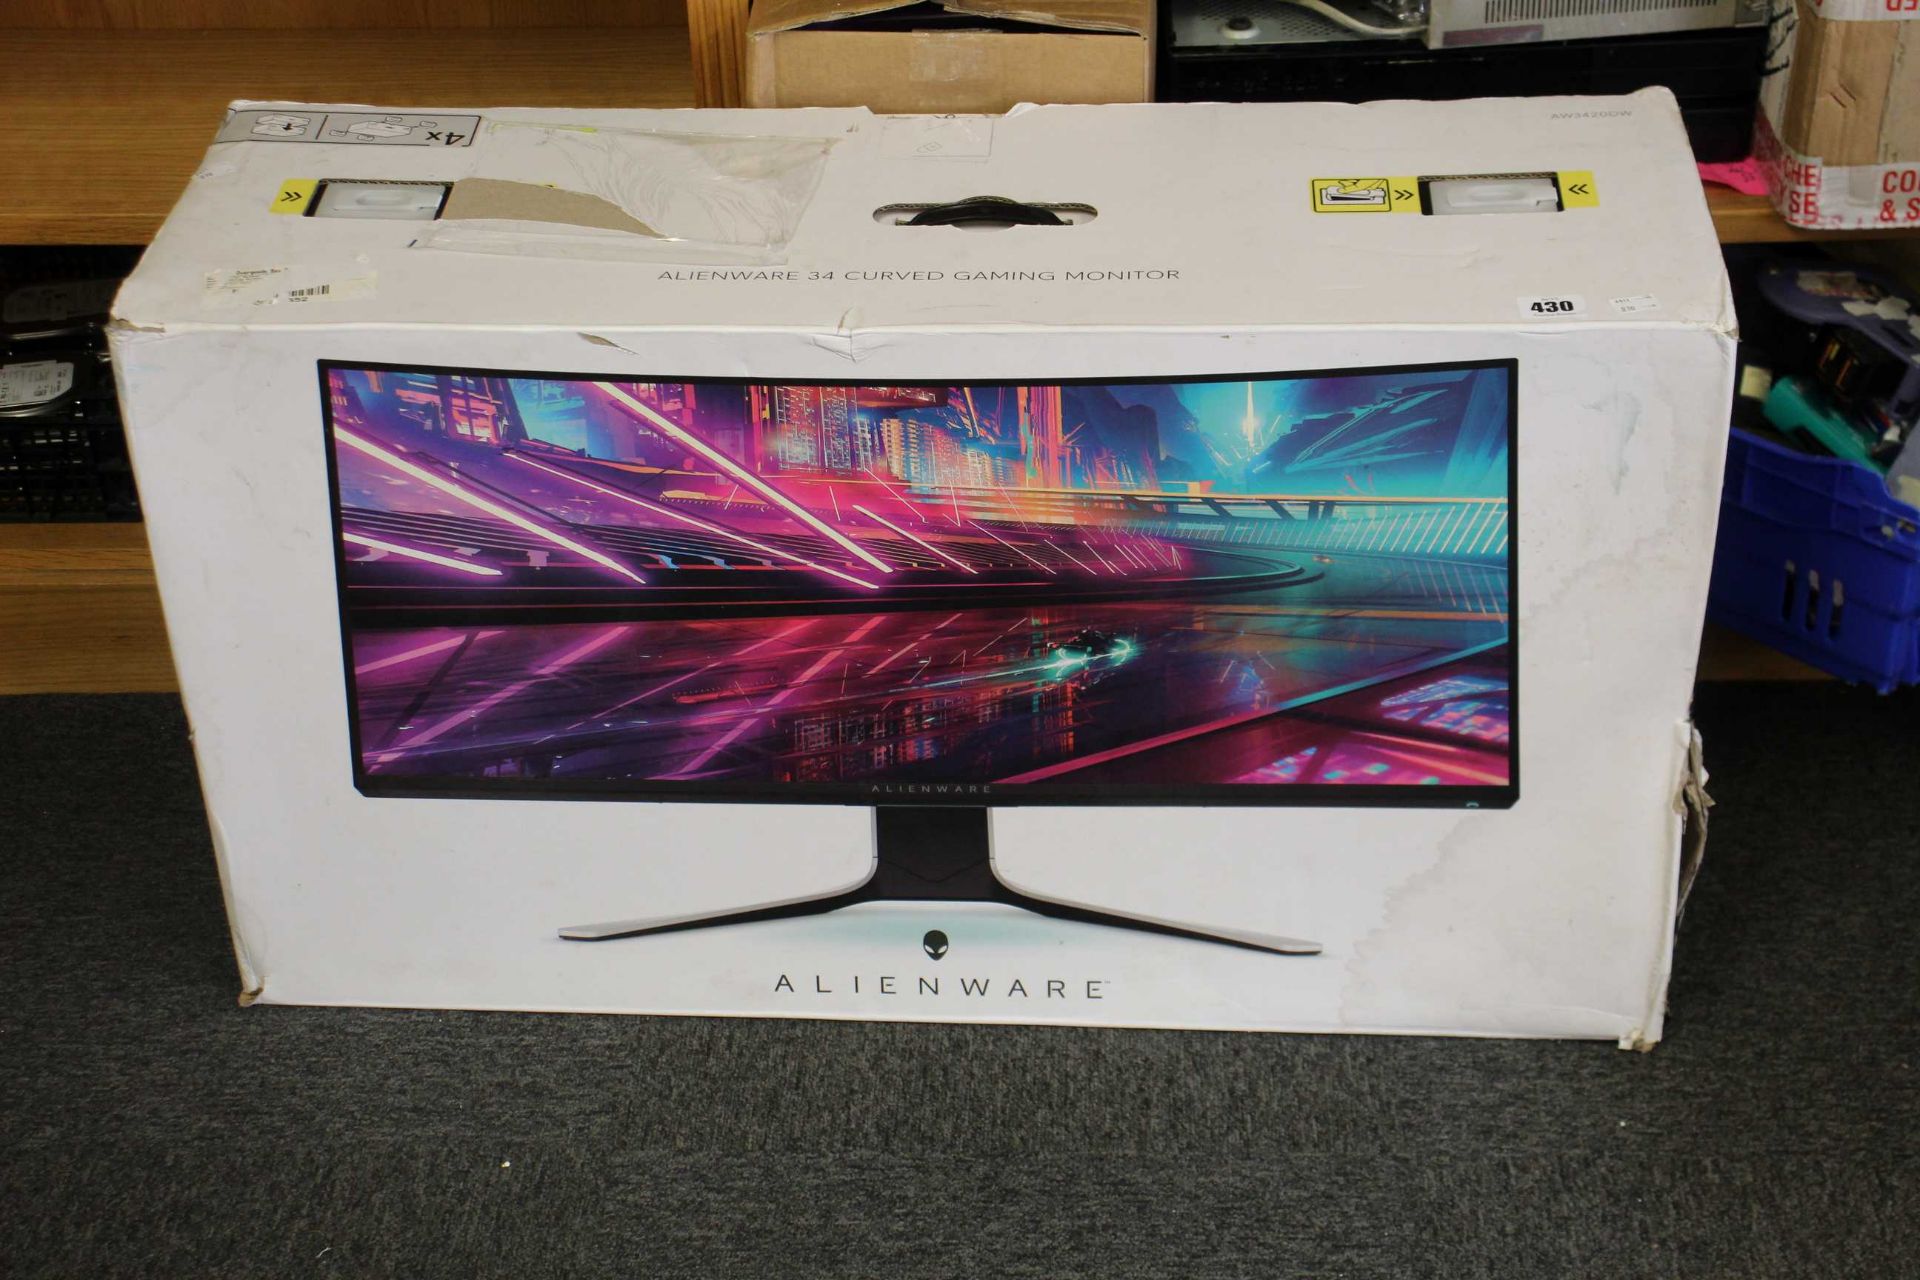 COLLECTION ONLY: A boxed as new Alienware AW3420DW 34" WQHD (3440 x 1440) 21:9 Gaming Monitor (D/PN: